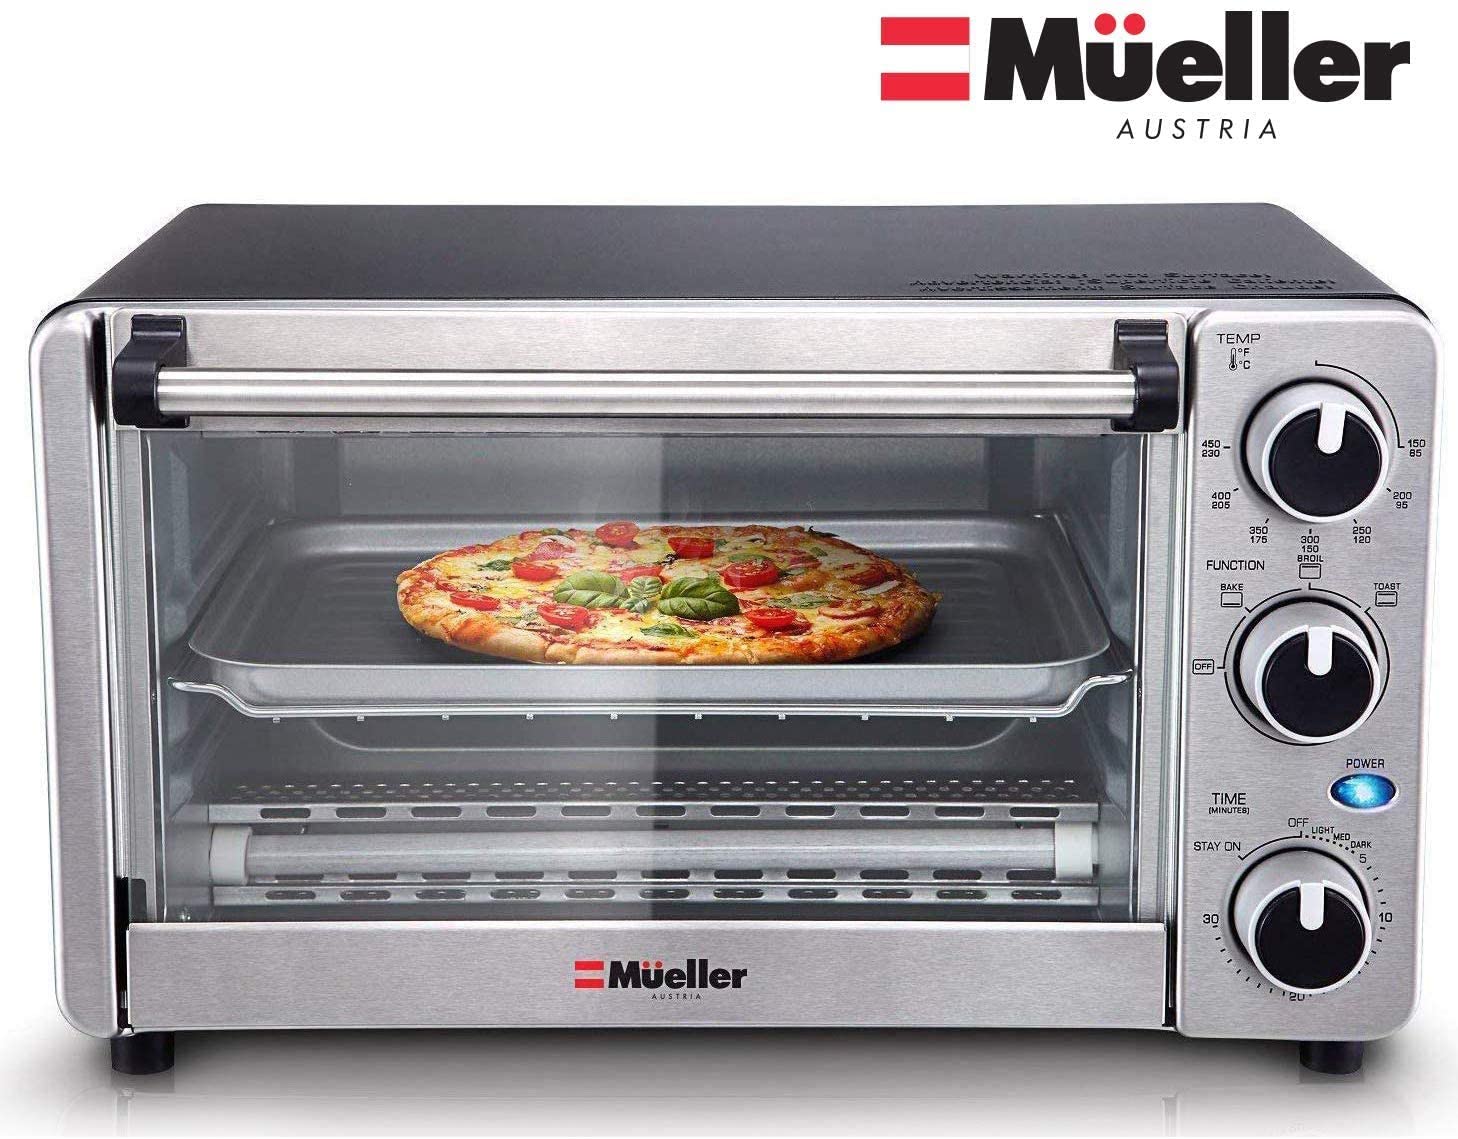 Toaster Oven by Mueller Austria